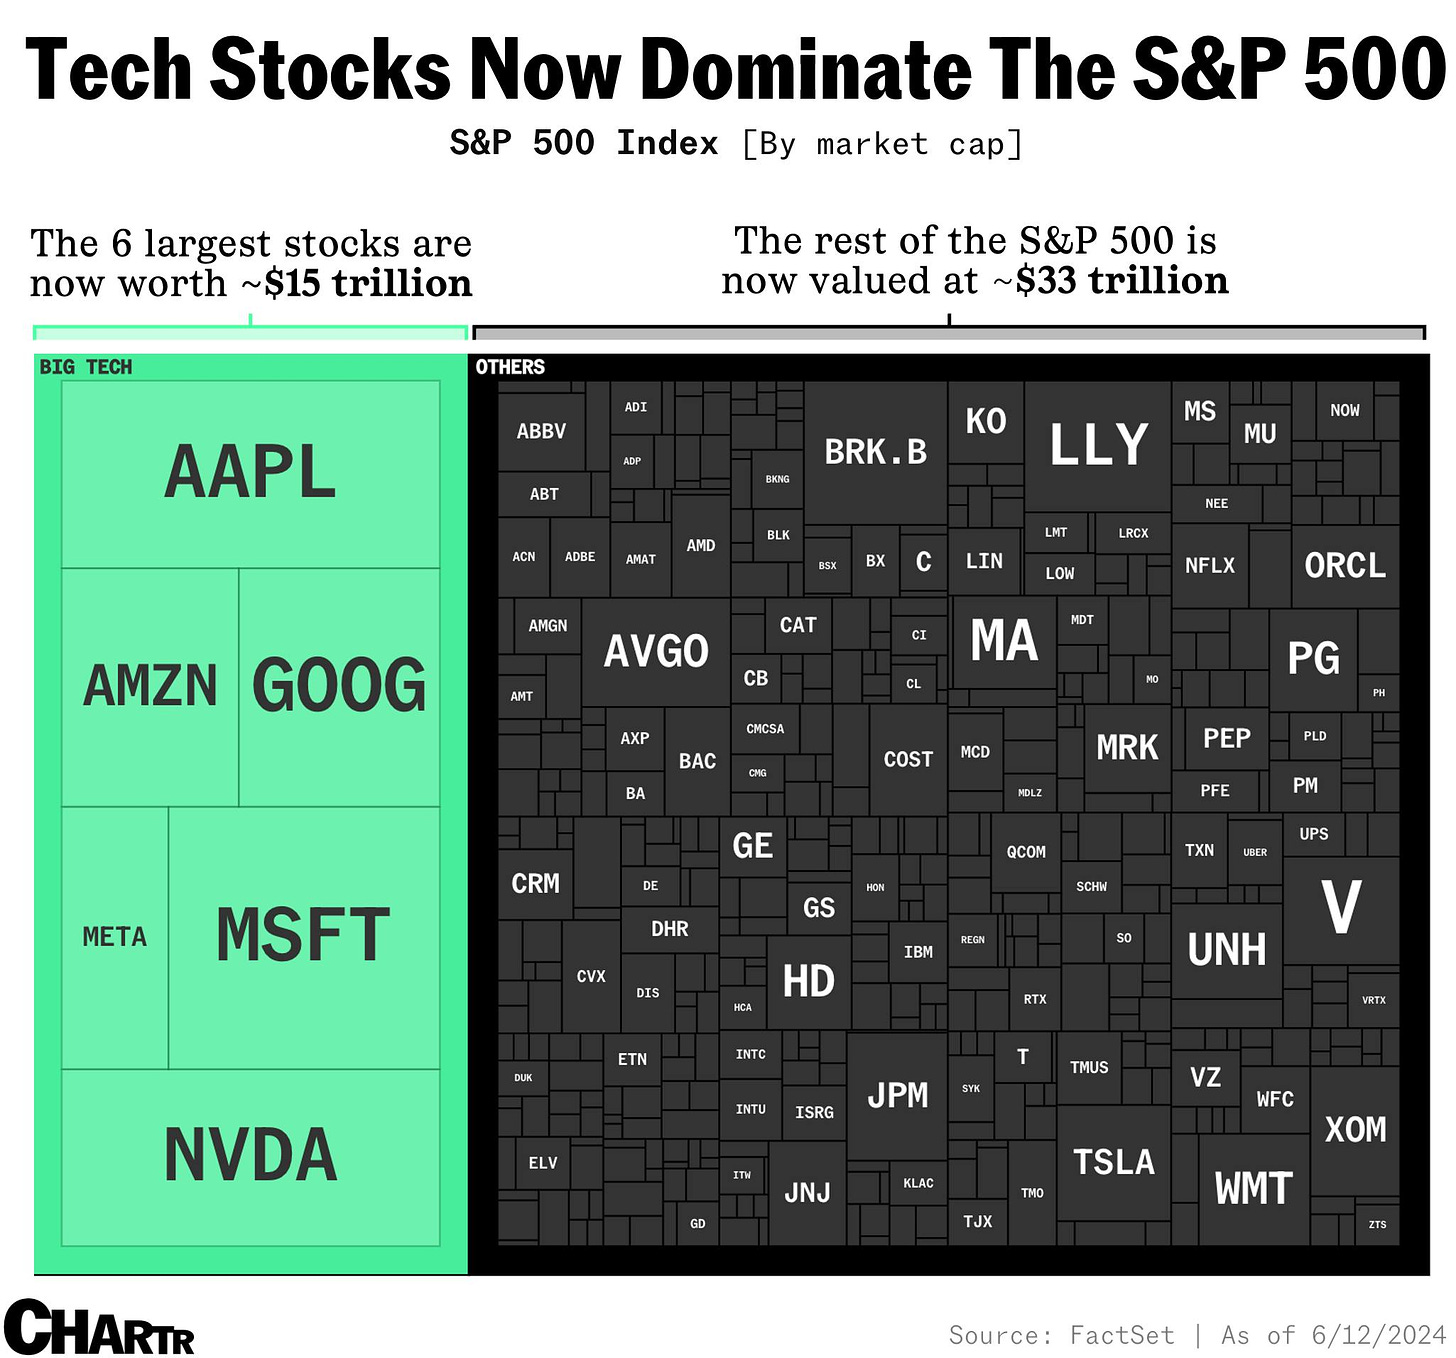 Big tech is dominating stock market indices